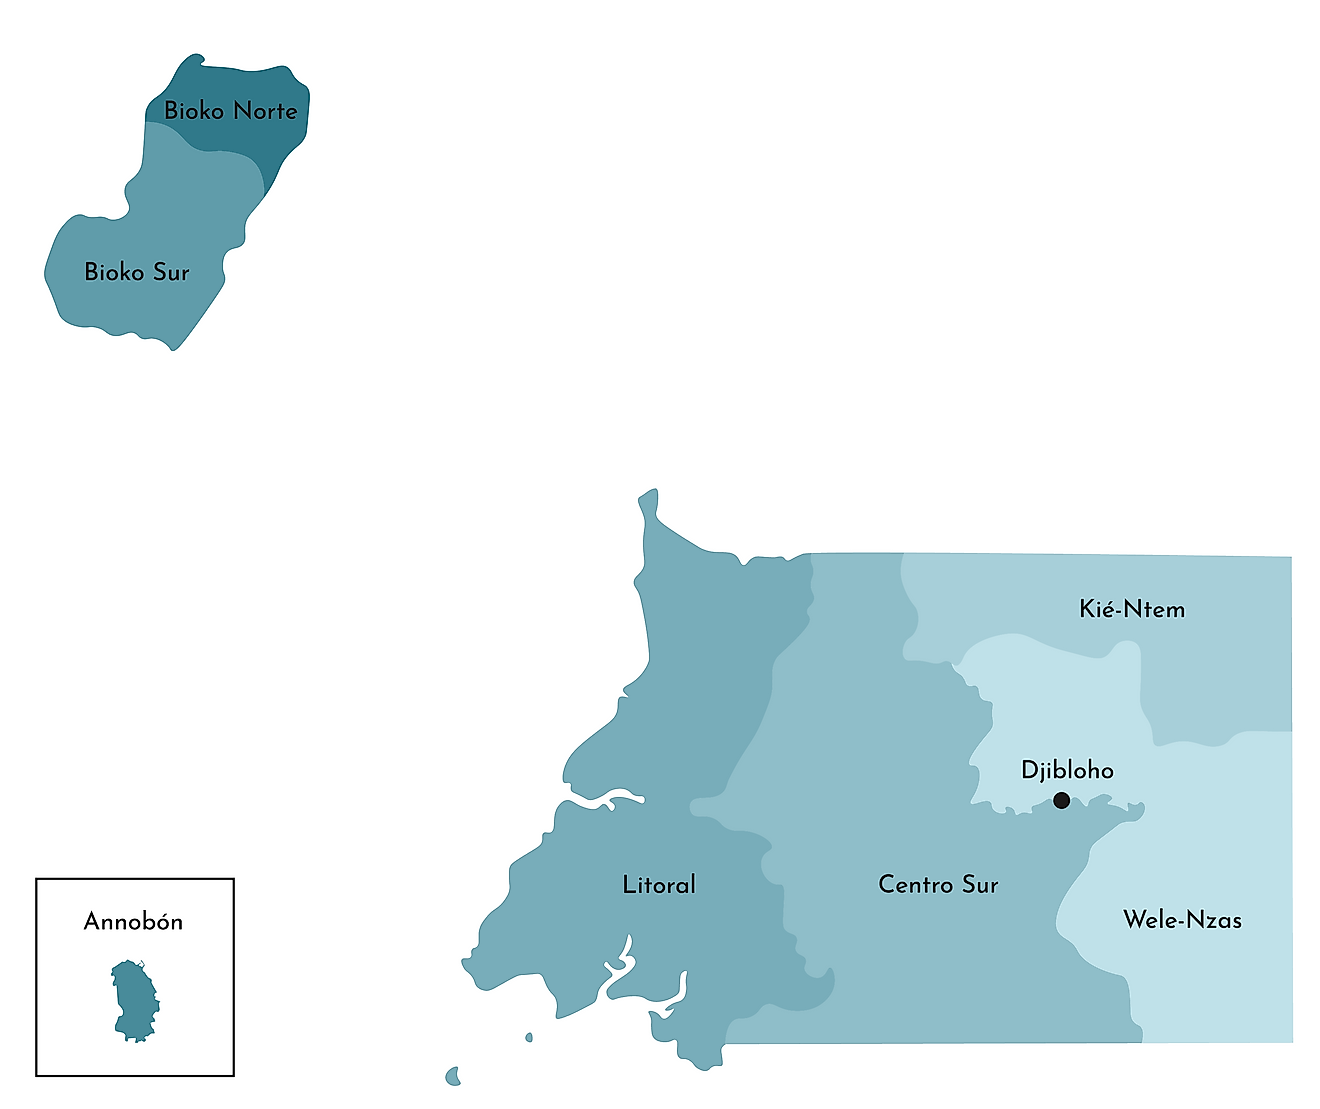 Political Map of Equatorial Guinea displaying its 8 provinces, and their major cities.